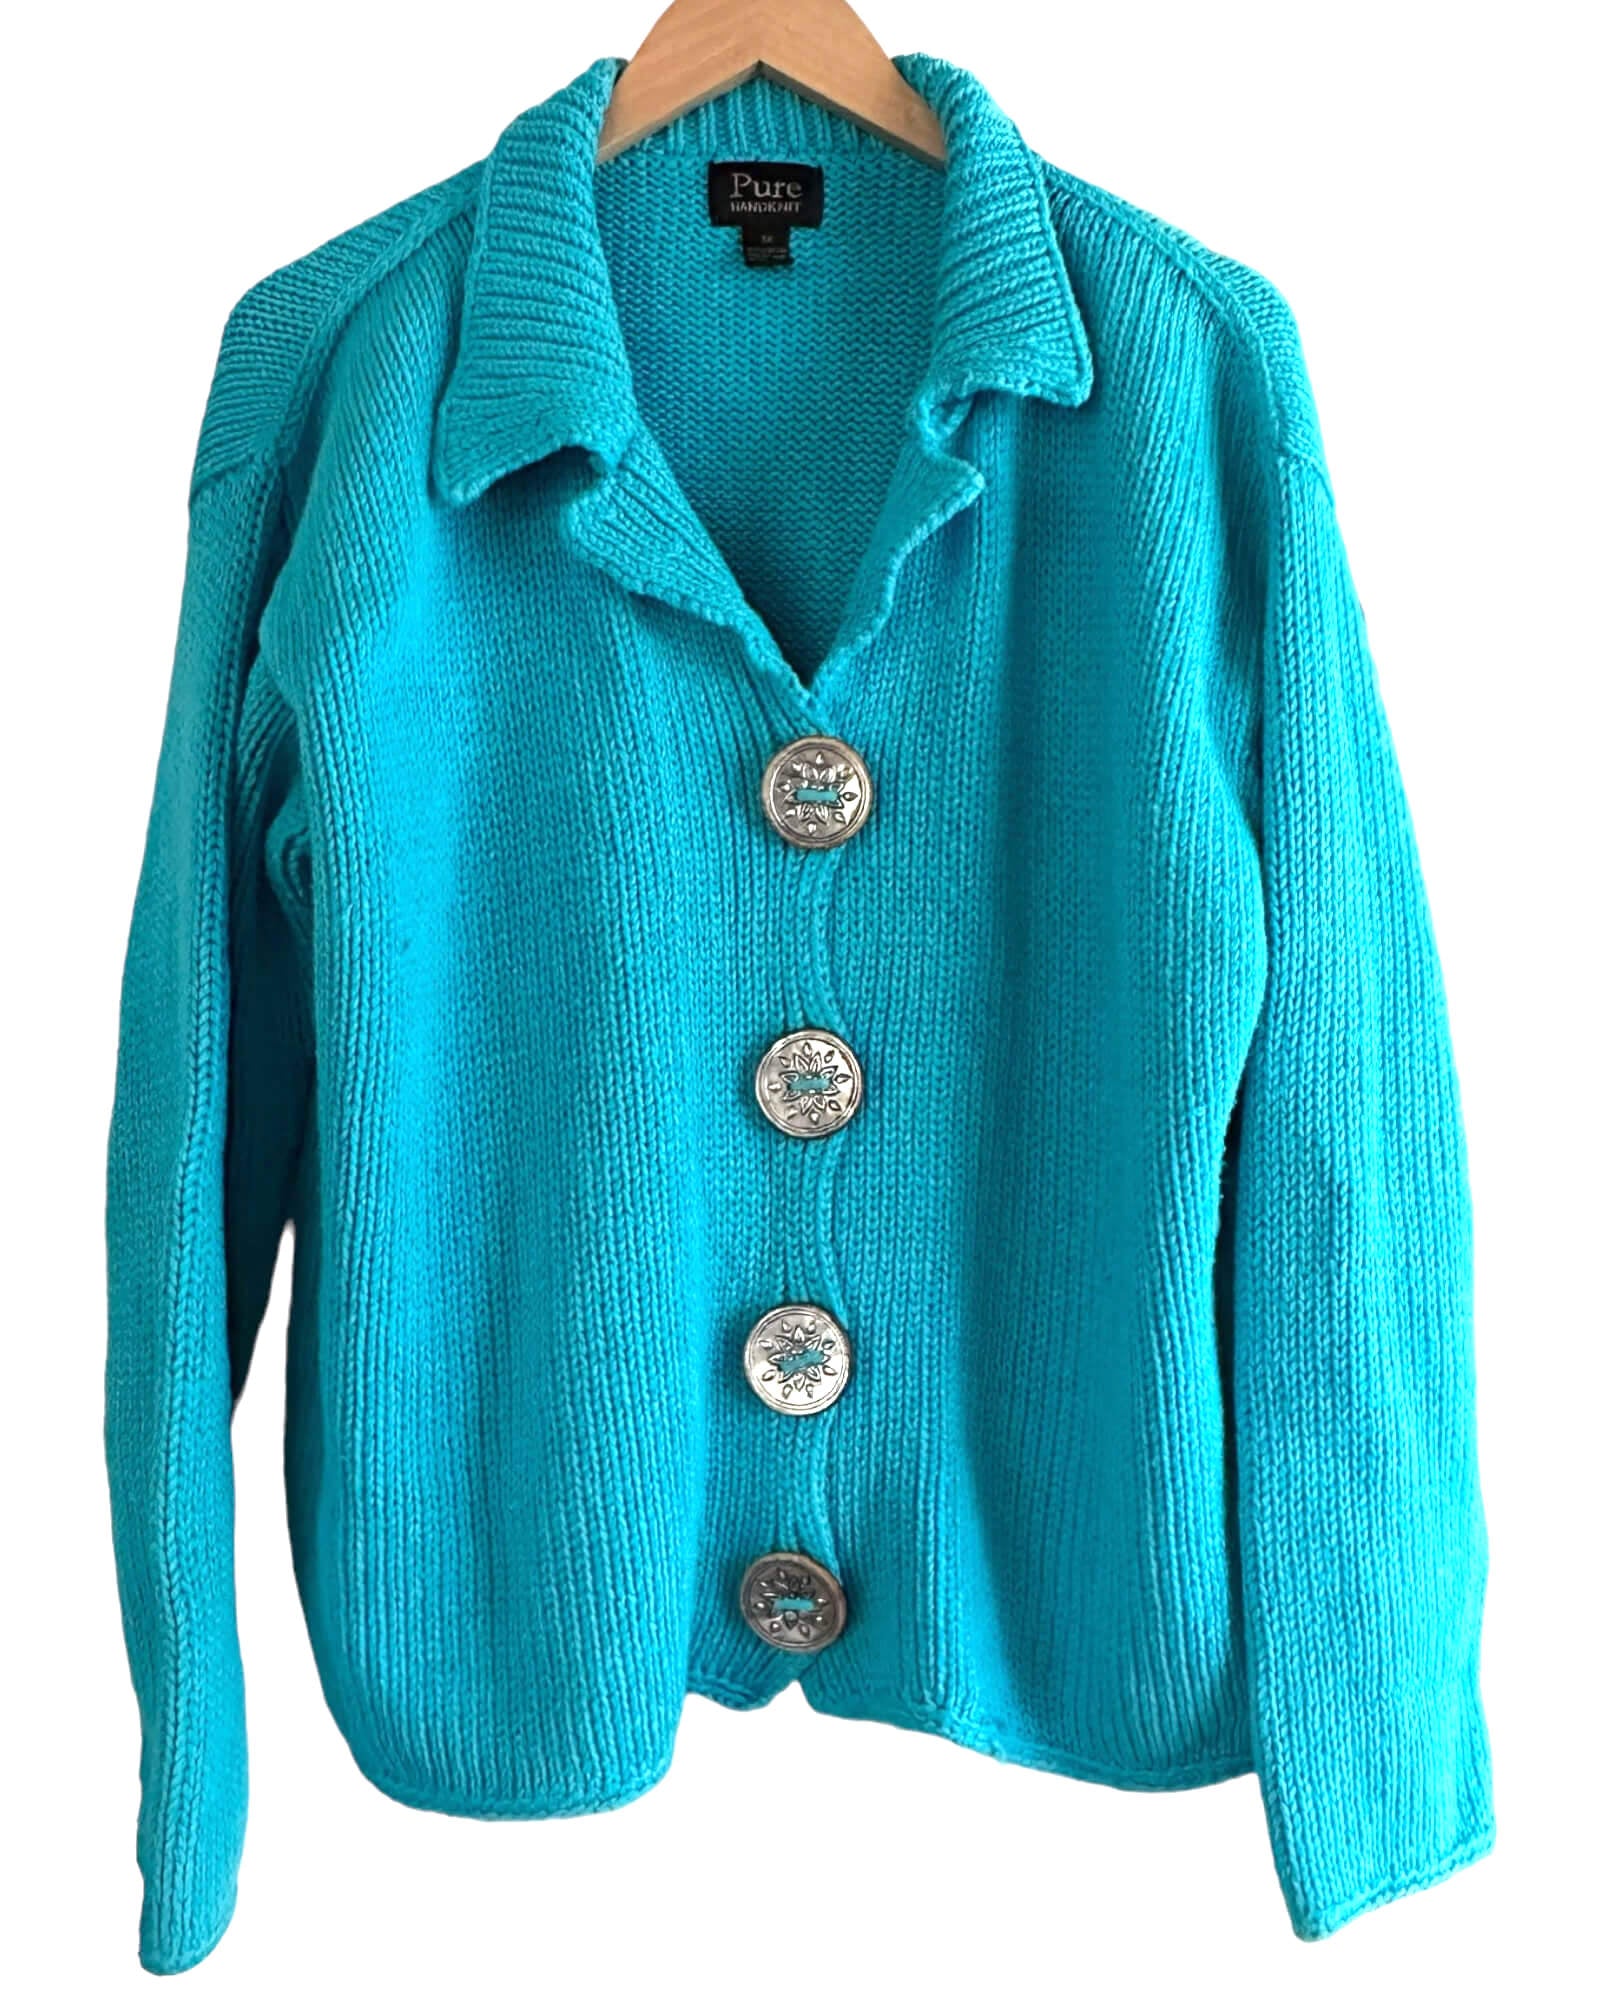 Bright Spring Teal Sweater Jacket